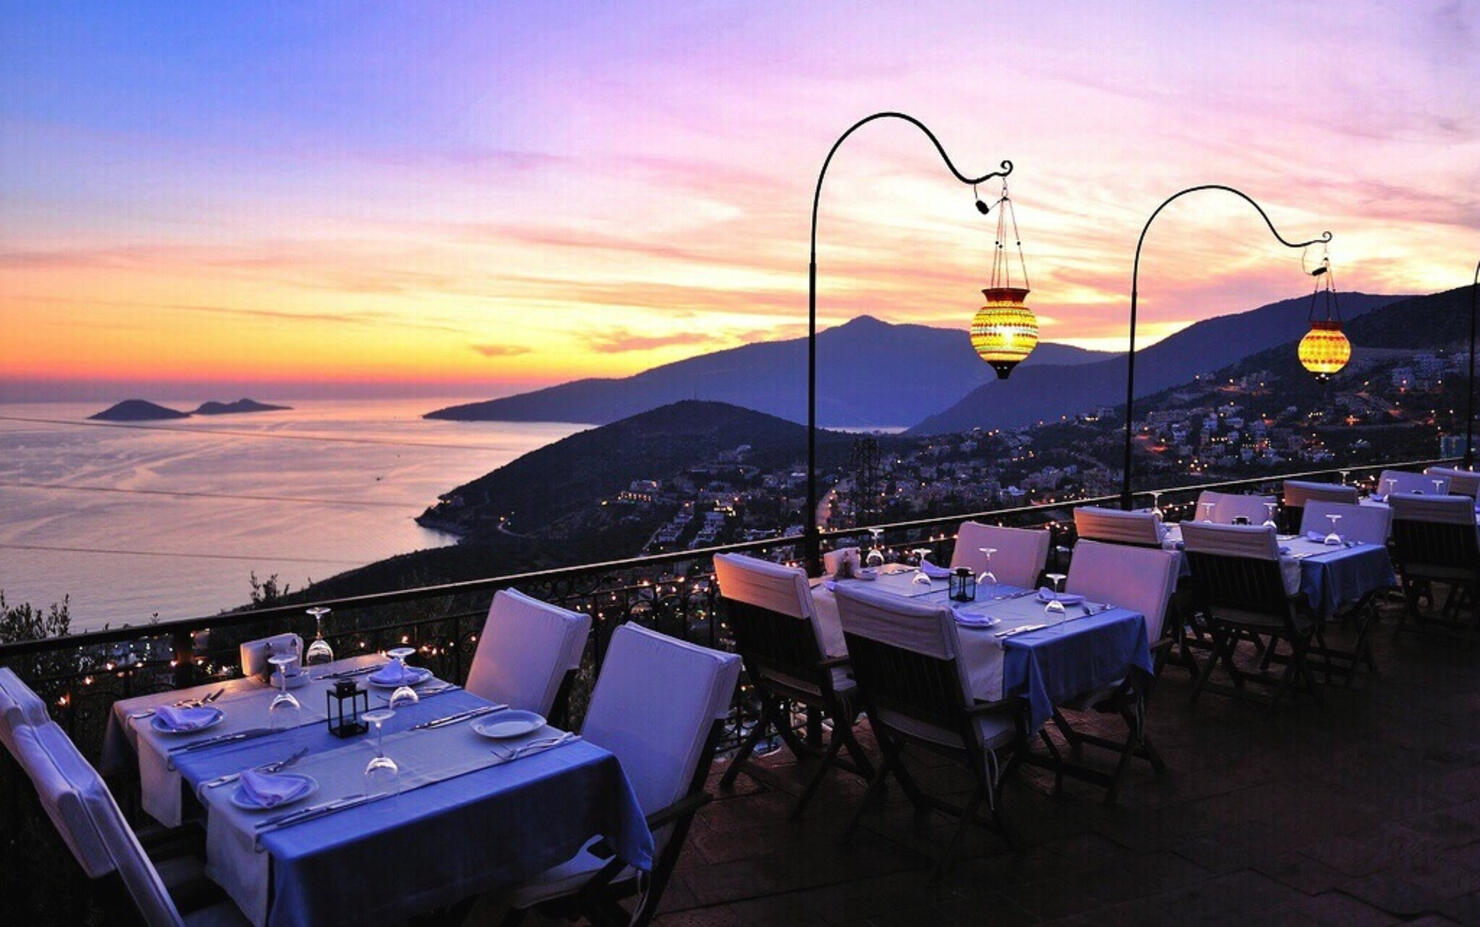 Dinning Table At Sidewalk Cafe By Mountains And Sea During Sunset